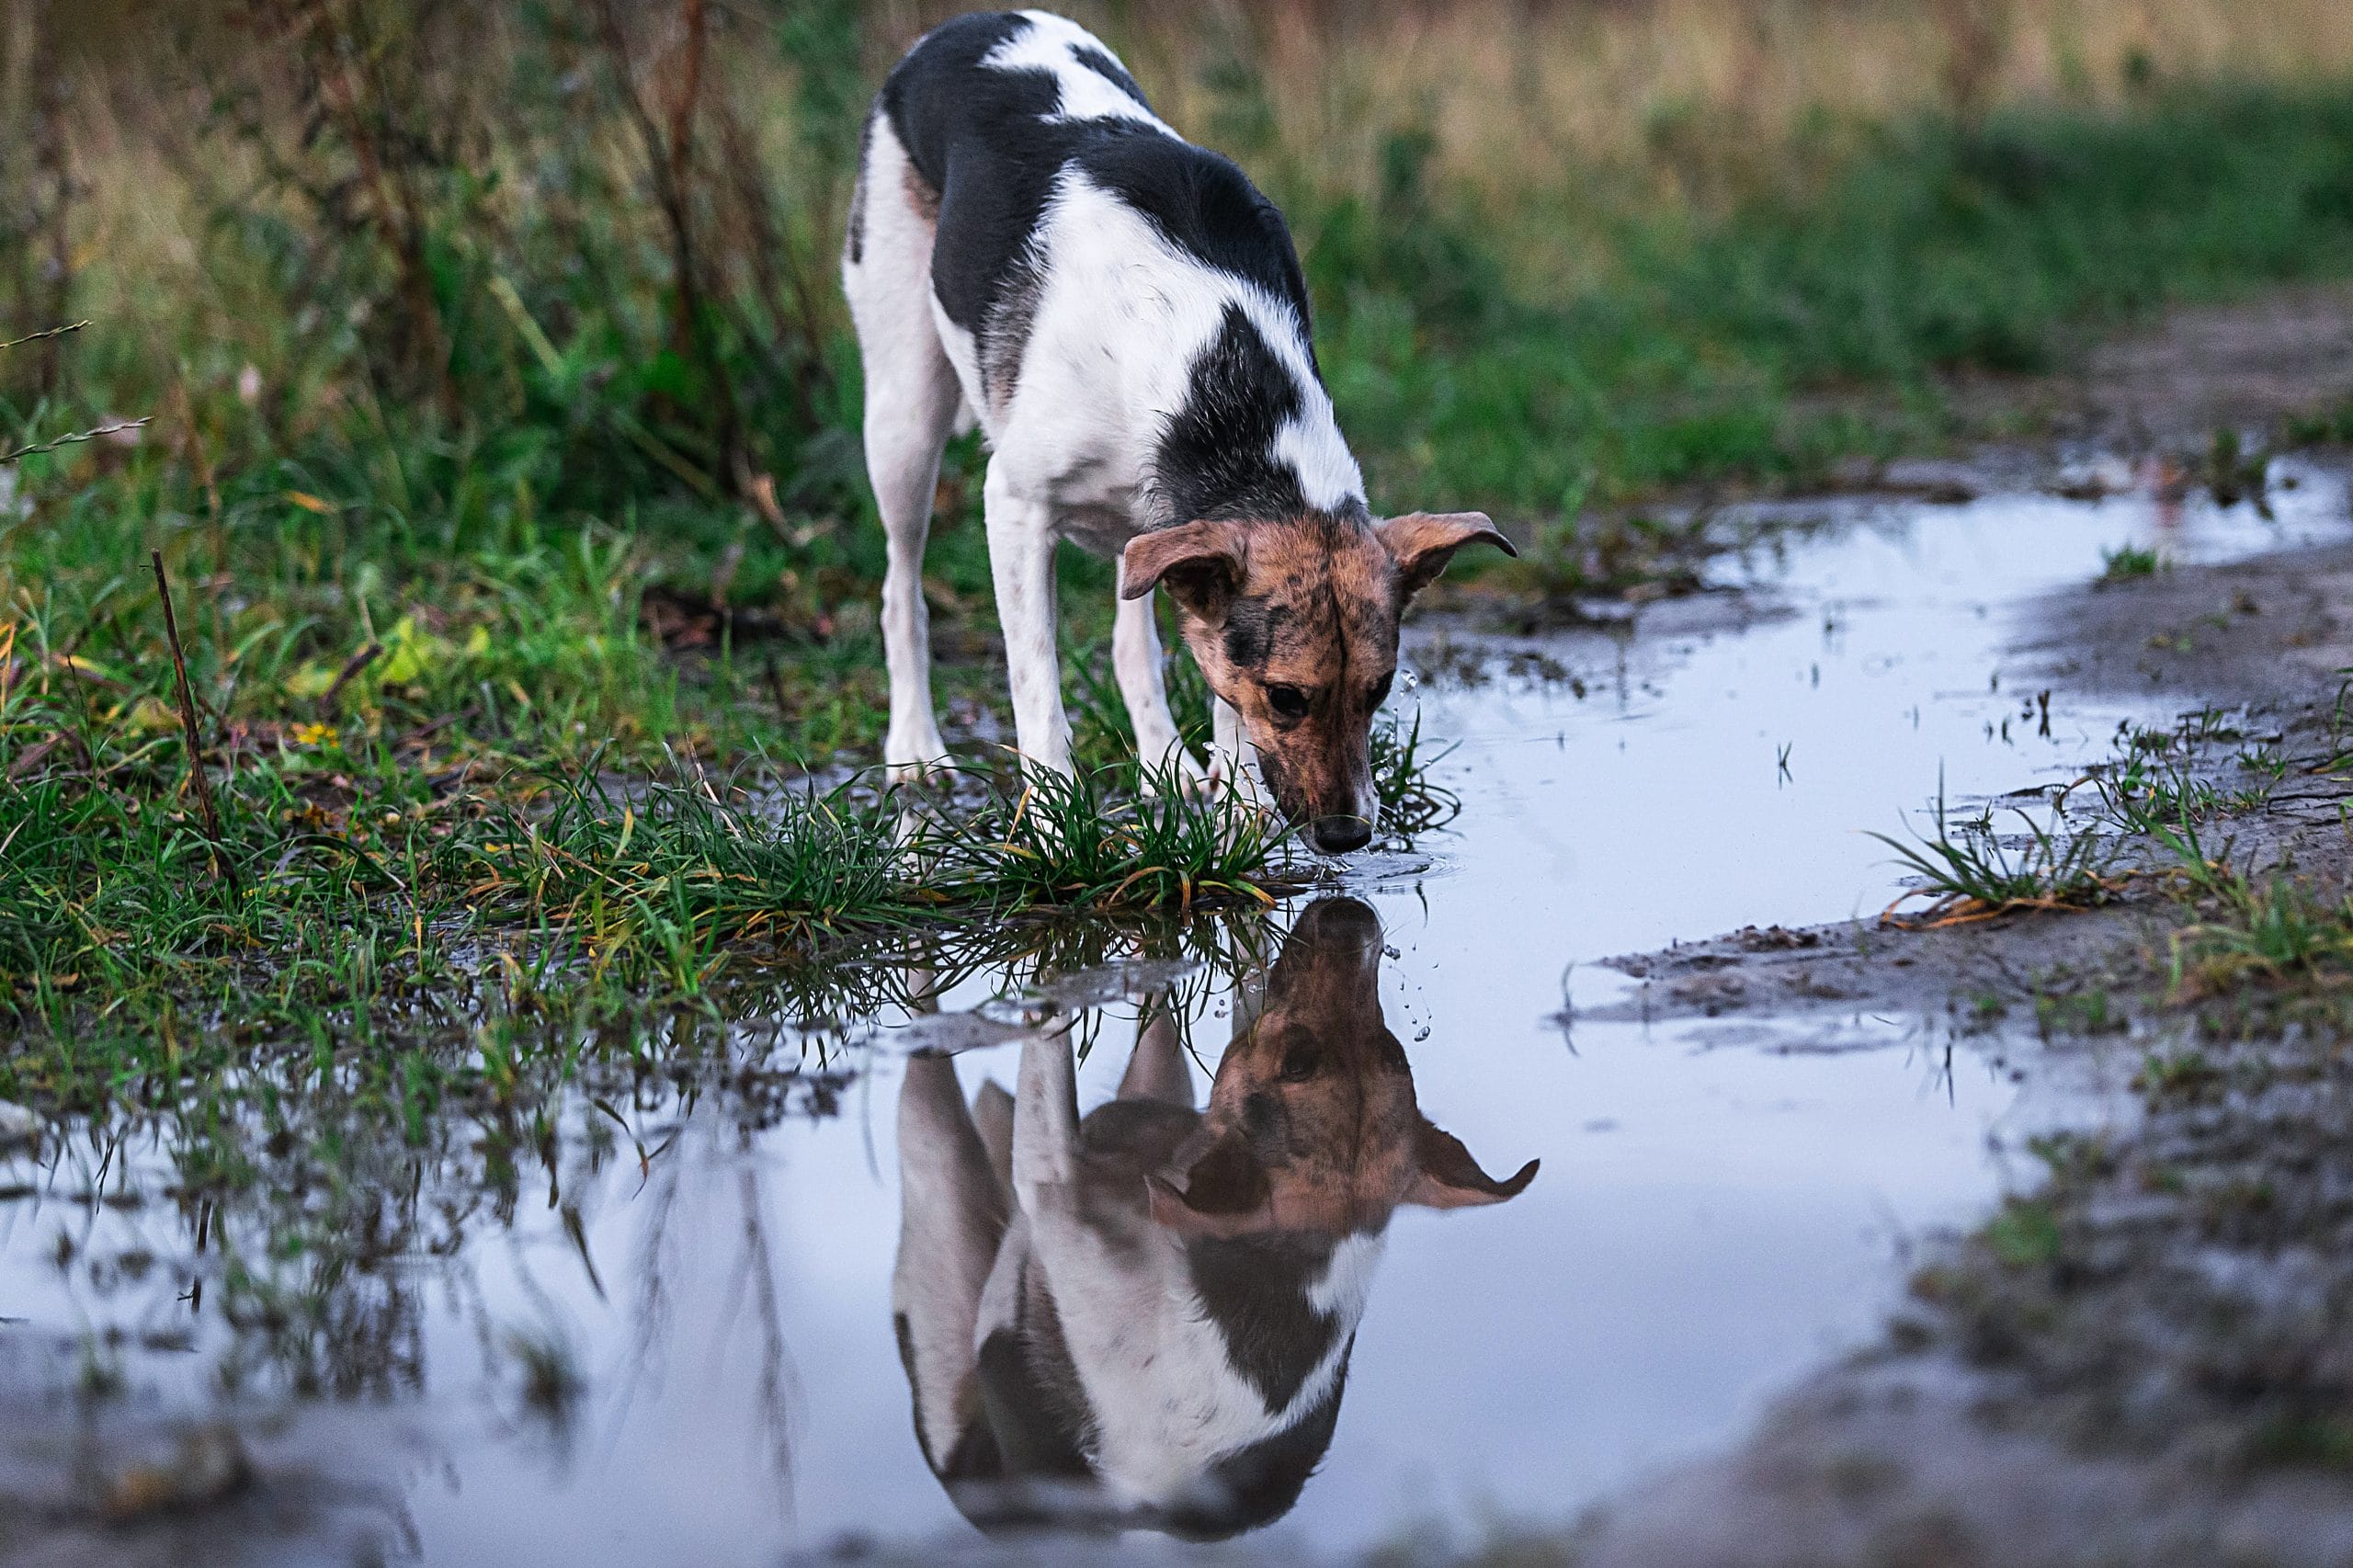 Calm mongrel dog drinking from puddle in the evening